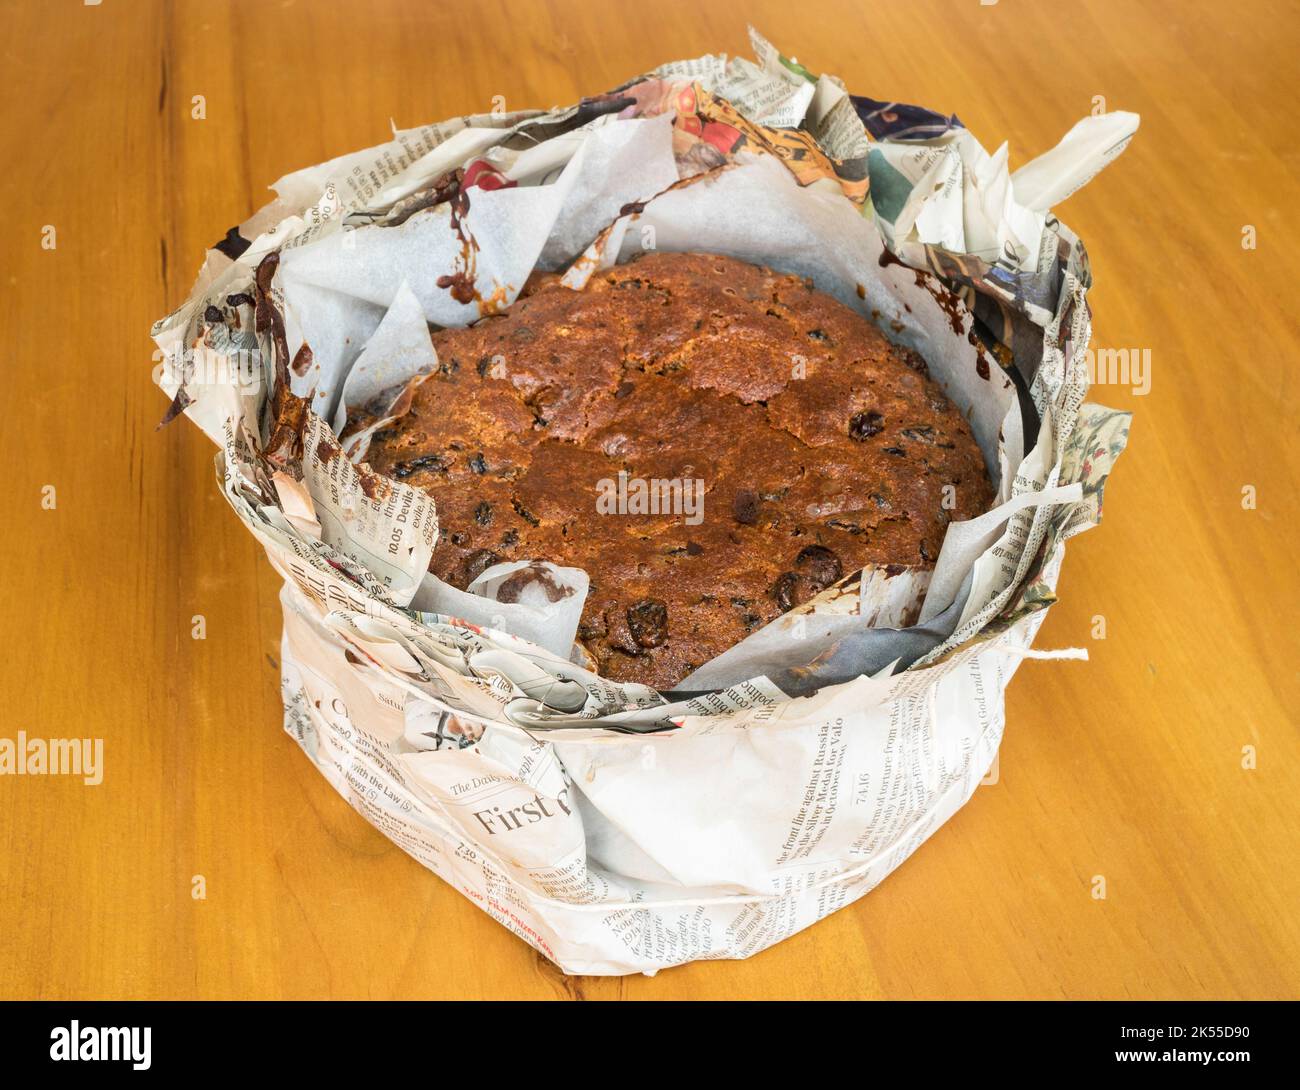 Christmas cake wrapped in newspaper to insulate while cooking Stock Photo